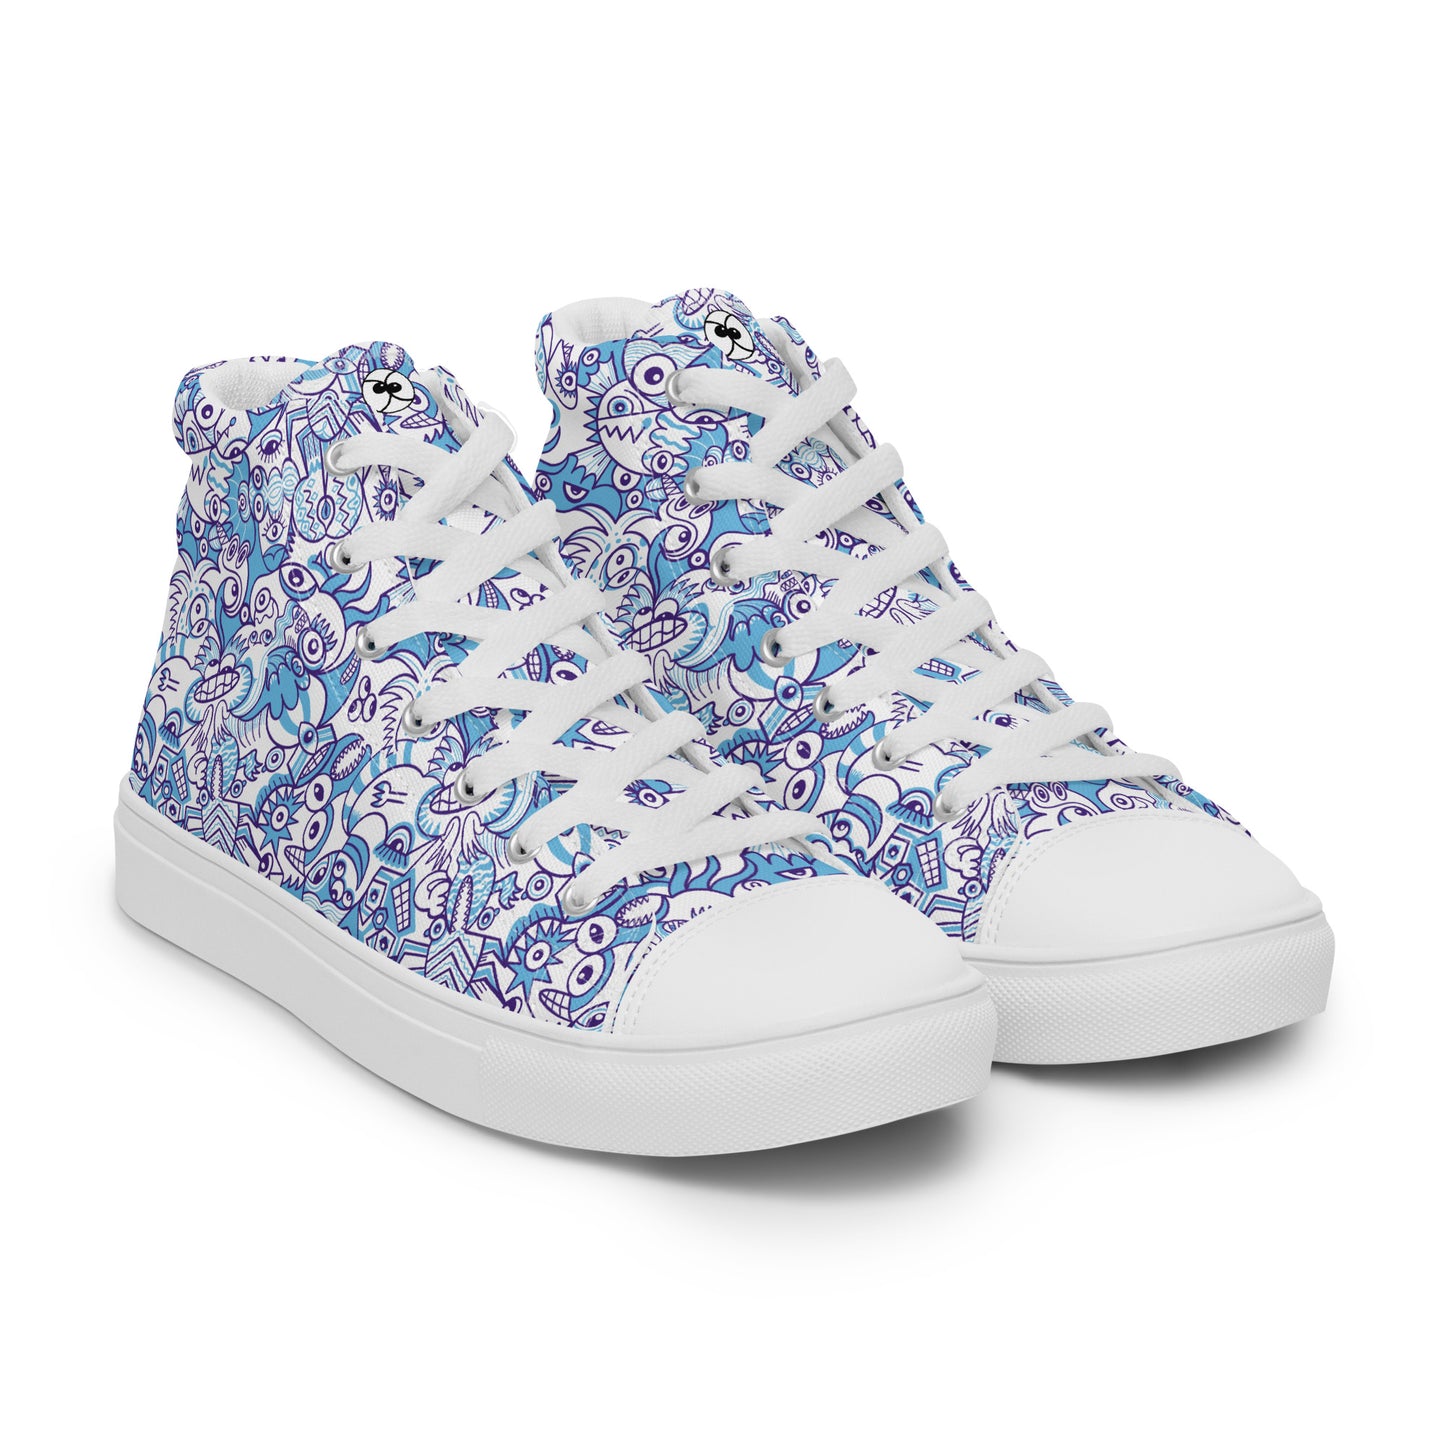 Whimsical Blue Doodle Critterscape pattern design Women’s high top canvas shoes. Overview